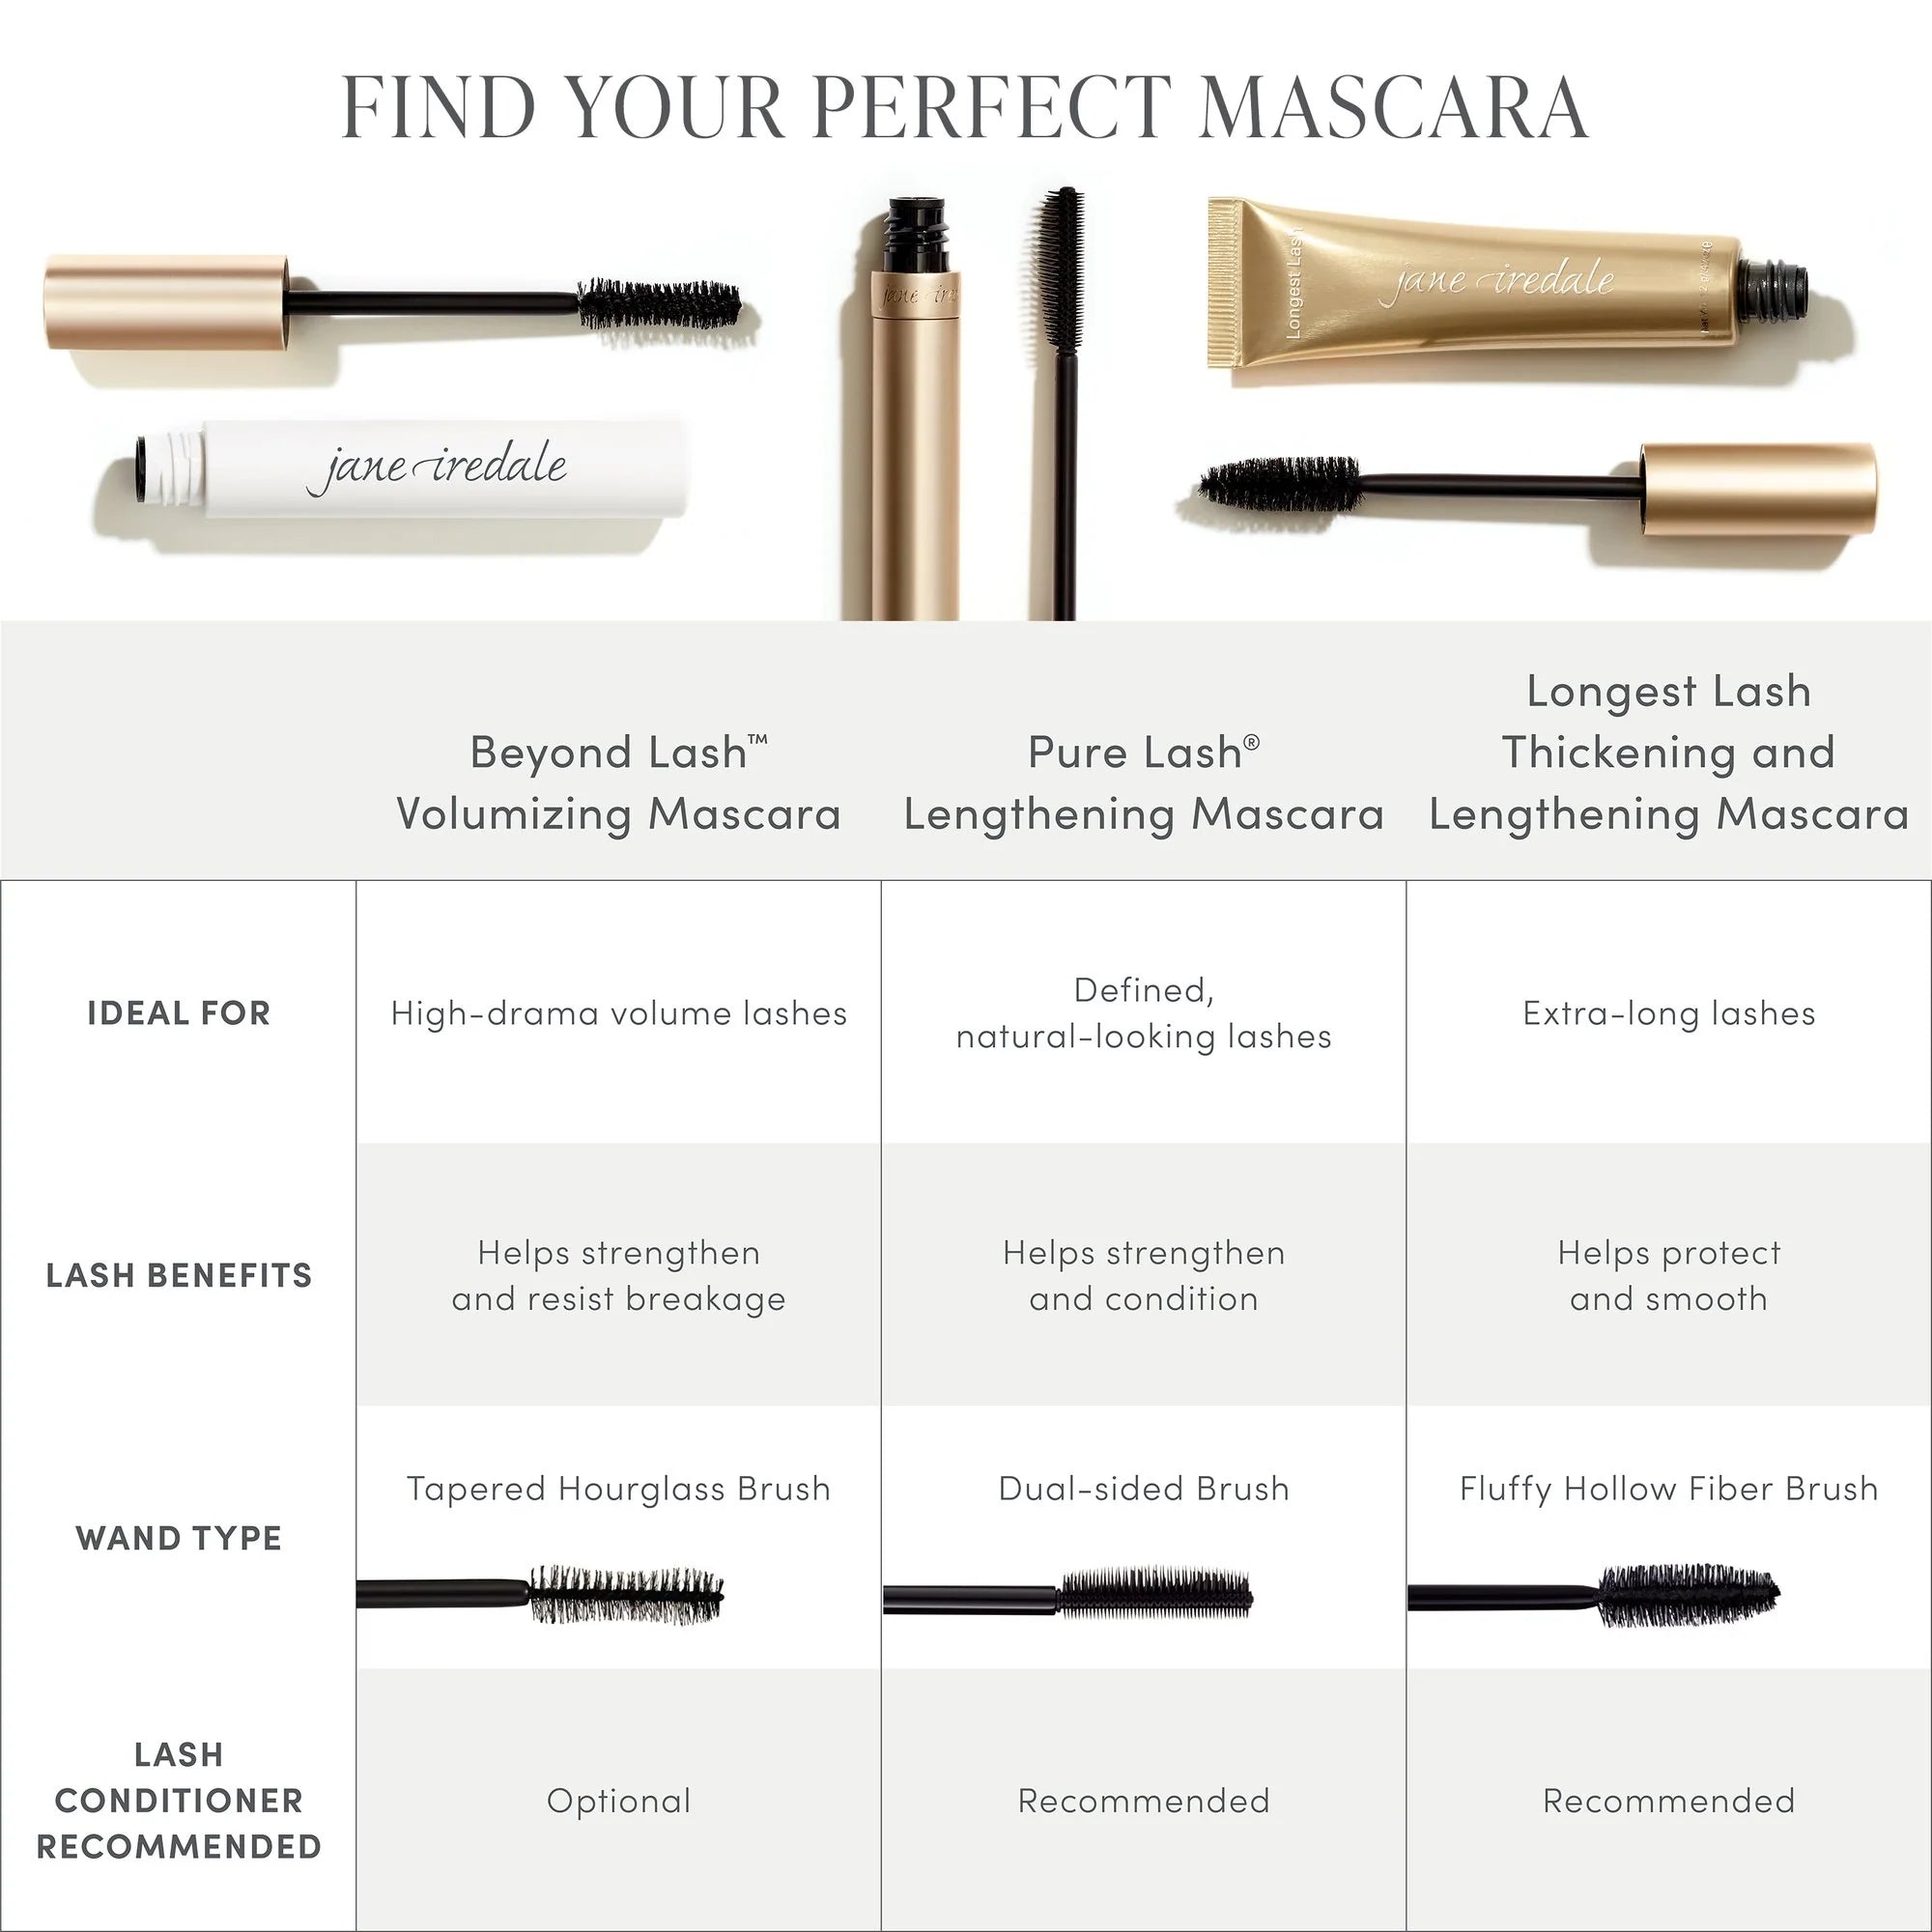 Jane Iredale's Mascara Finder chart - Mascara's ideal for, lash benefits, wand type and lash conditioner recommended.